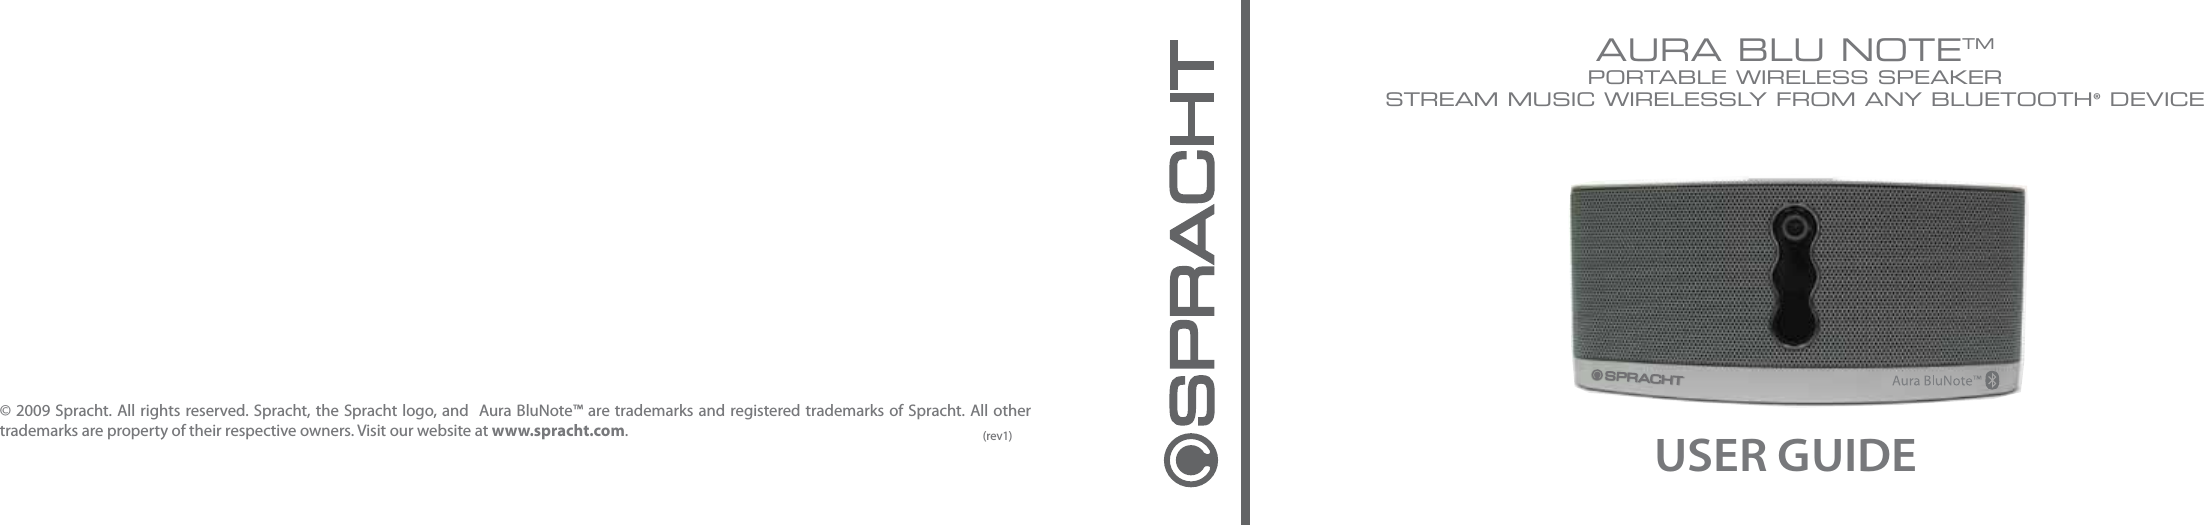 © 2009 Spracht. All rights reserved. Spracht, the Spracht logo, and  Aura BluNote™ are trademarks and registered trademarks of Spracht. All other trademarks are property of their respective owners. Visit our website at www.spracht.com. AURA BLU NOTETMPORTABLE WIRELESS SPEAKERSTREAM MUSIC WIRELESSLY FROM ANY BLUETOOTH® DEVICEUSER GUIDE(rev1)